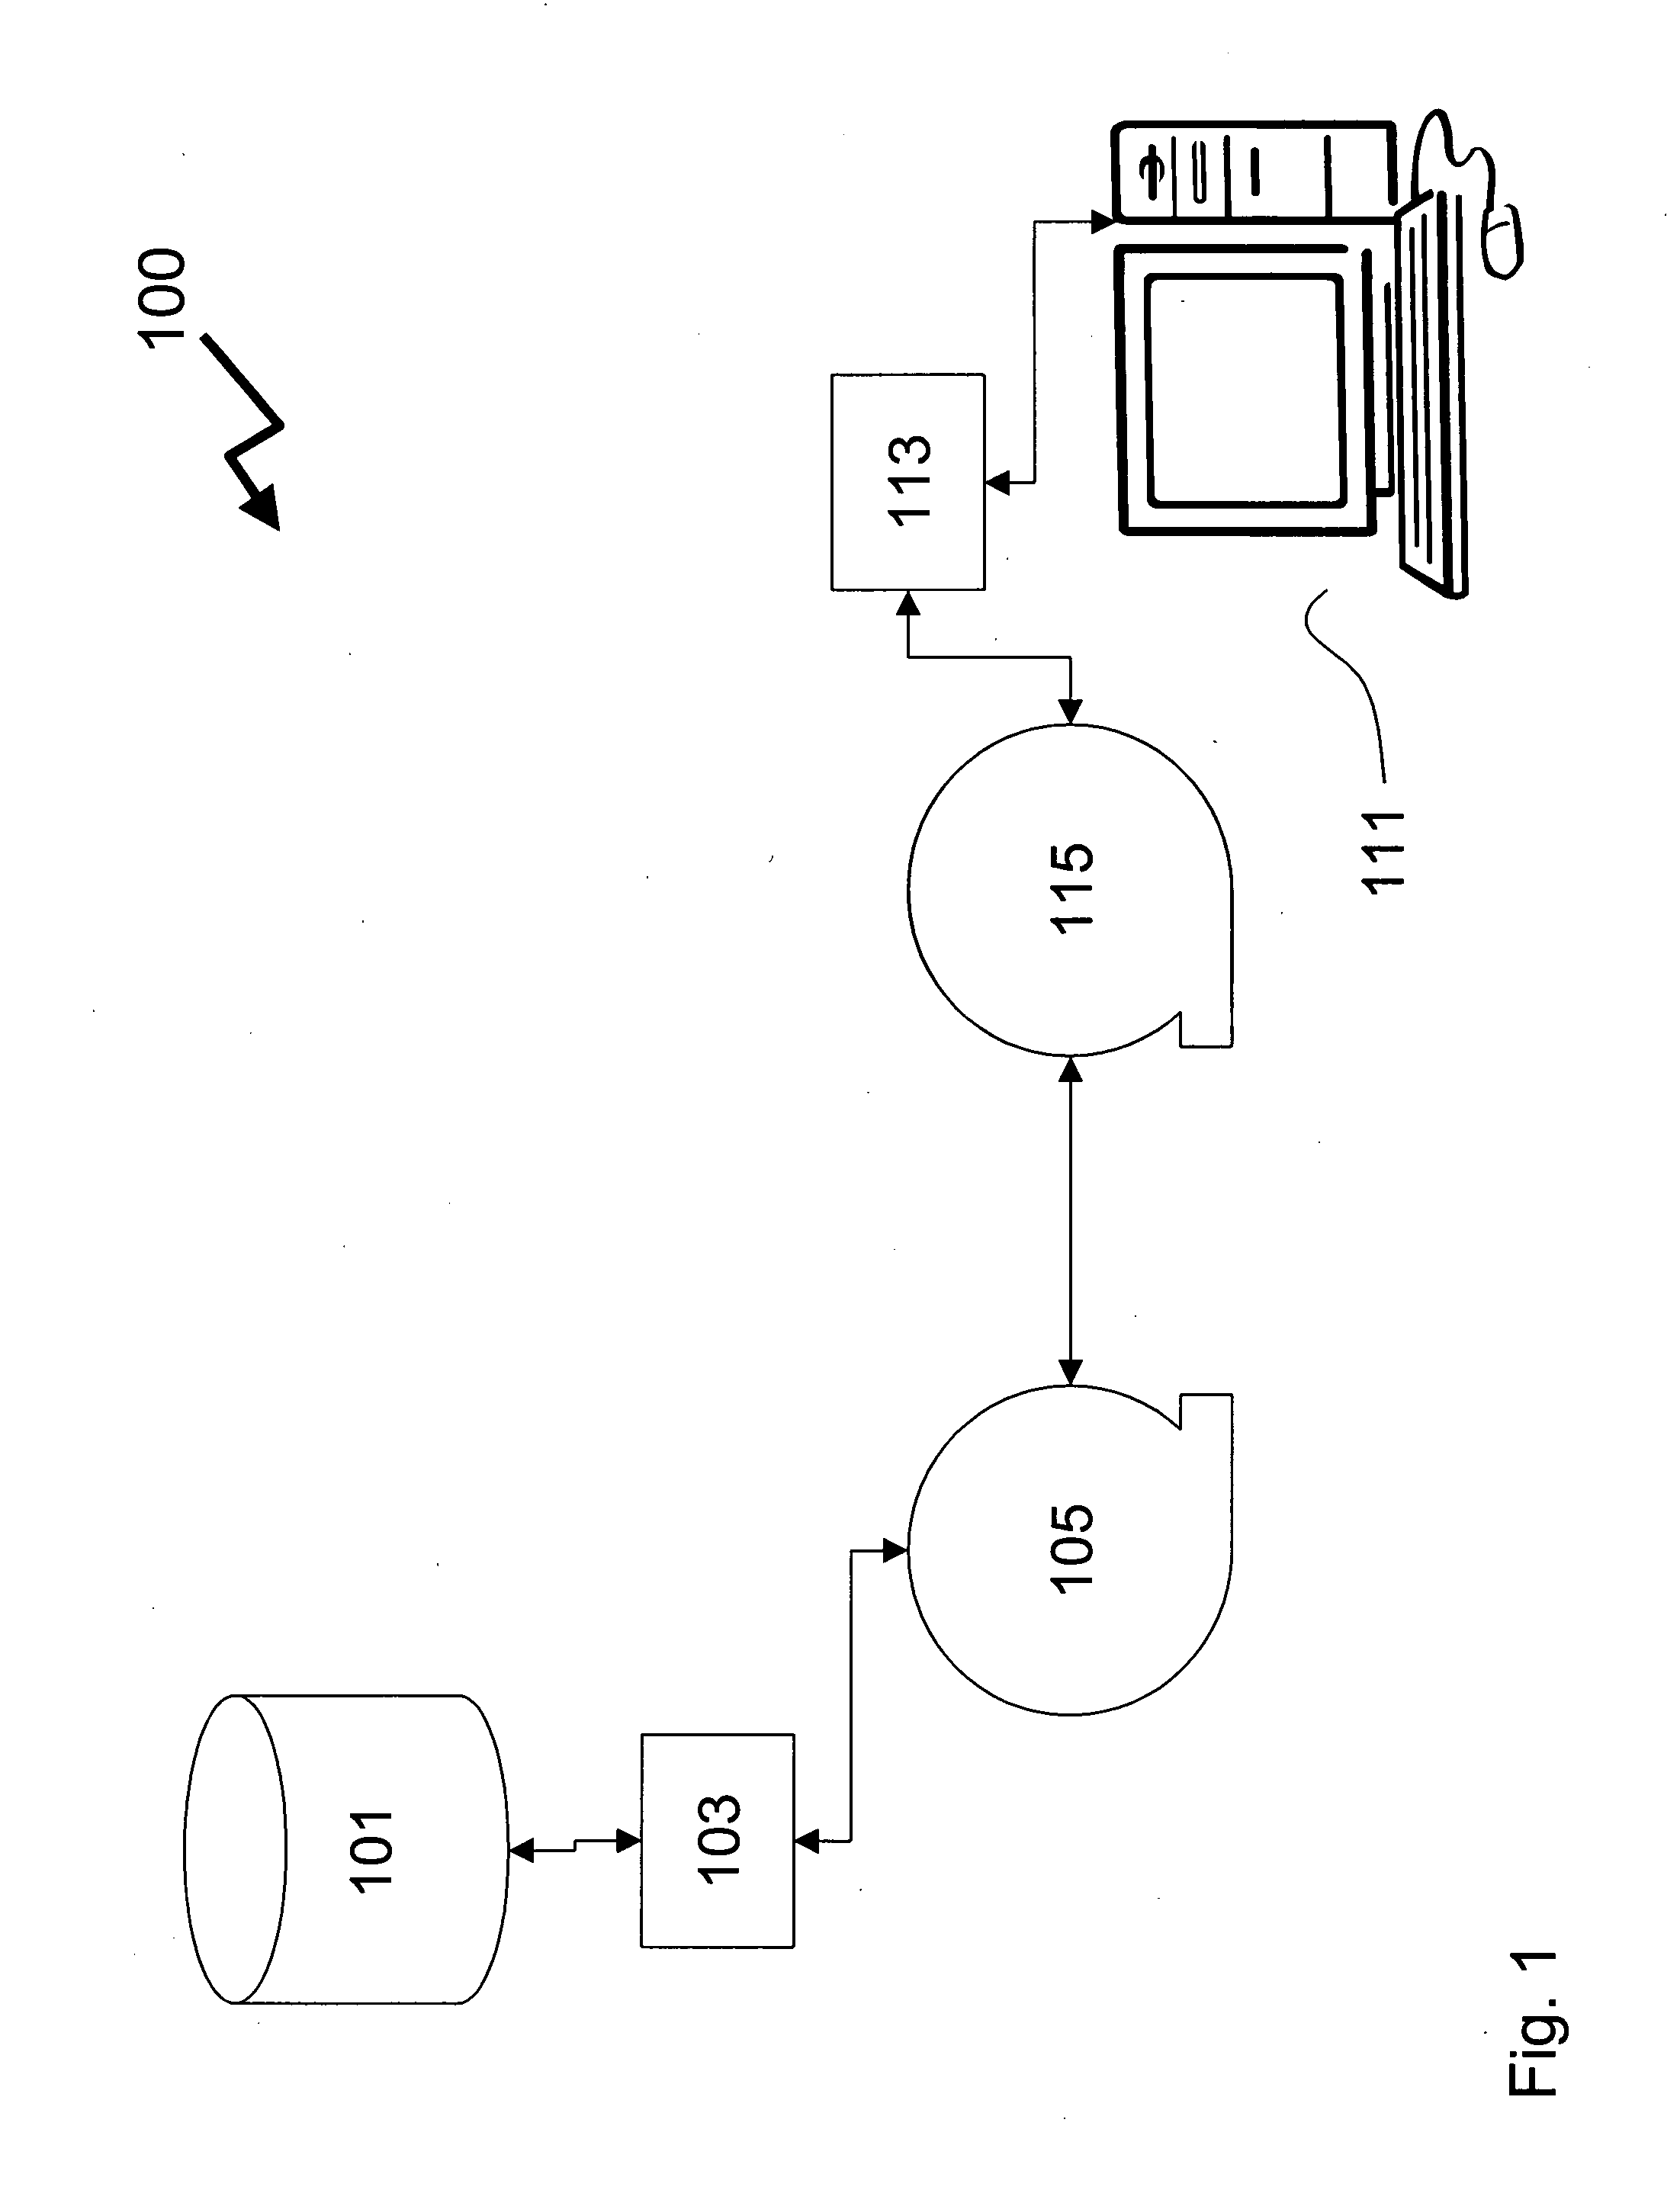 Method and system for detecting of errors within streaming audio/video data